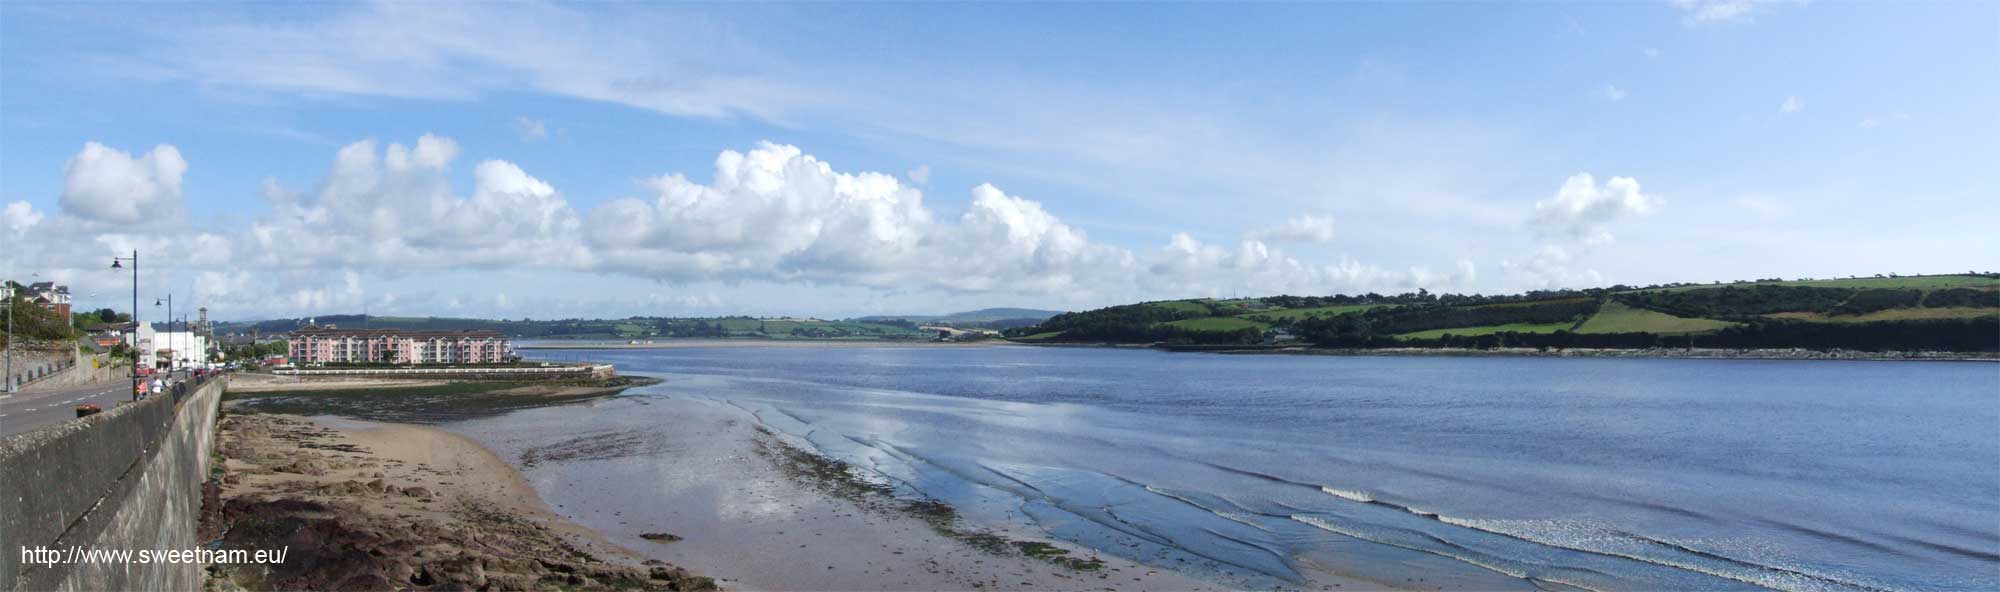 Panoramic photo of Youghal looking up the Rivert Blackwater, taken from the viewing platform by Youghal Lighthouse.